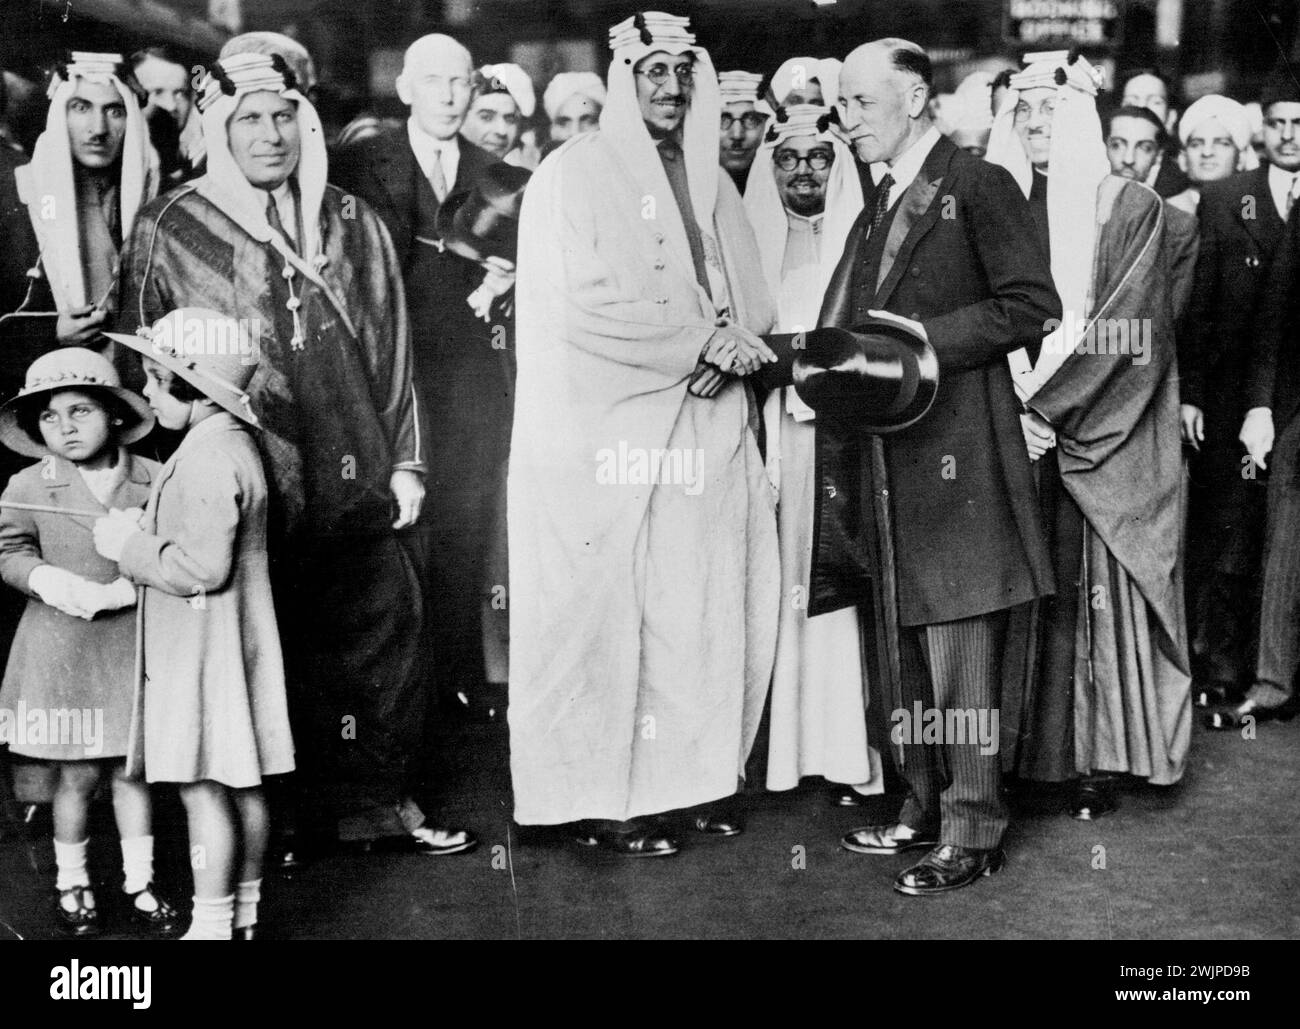 Arabian crown prince arrives in London. The Emir Saud, crown prince of Saudi Arabia, and heir to king Abdul IBN Saud, arriving in England on a visit, June 17th. The crown princes of Saudi Arabia being welcomed on behalf of the king by the Earl of Dunmore on his arrival at Victoria, Station, London. The two little daughters of the Arabian Minister in London may be seen in foreground. June 17, 1935. (Photo by Sports & General Press Agency Limited). Stock Photo